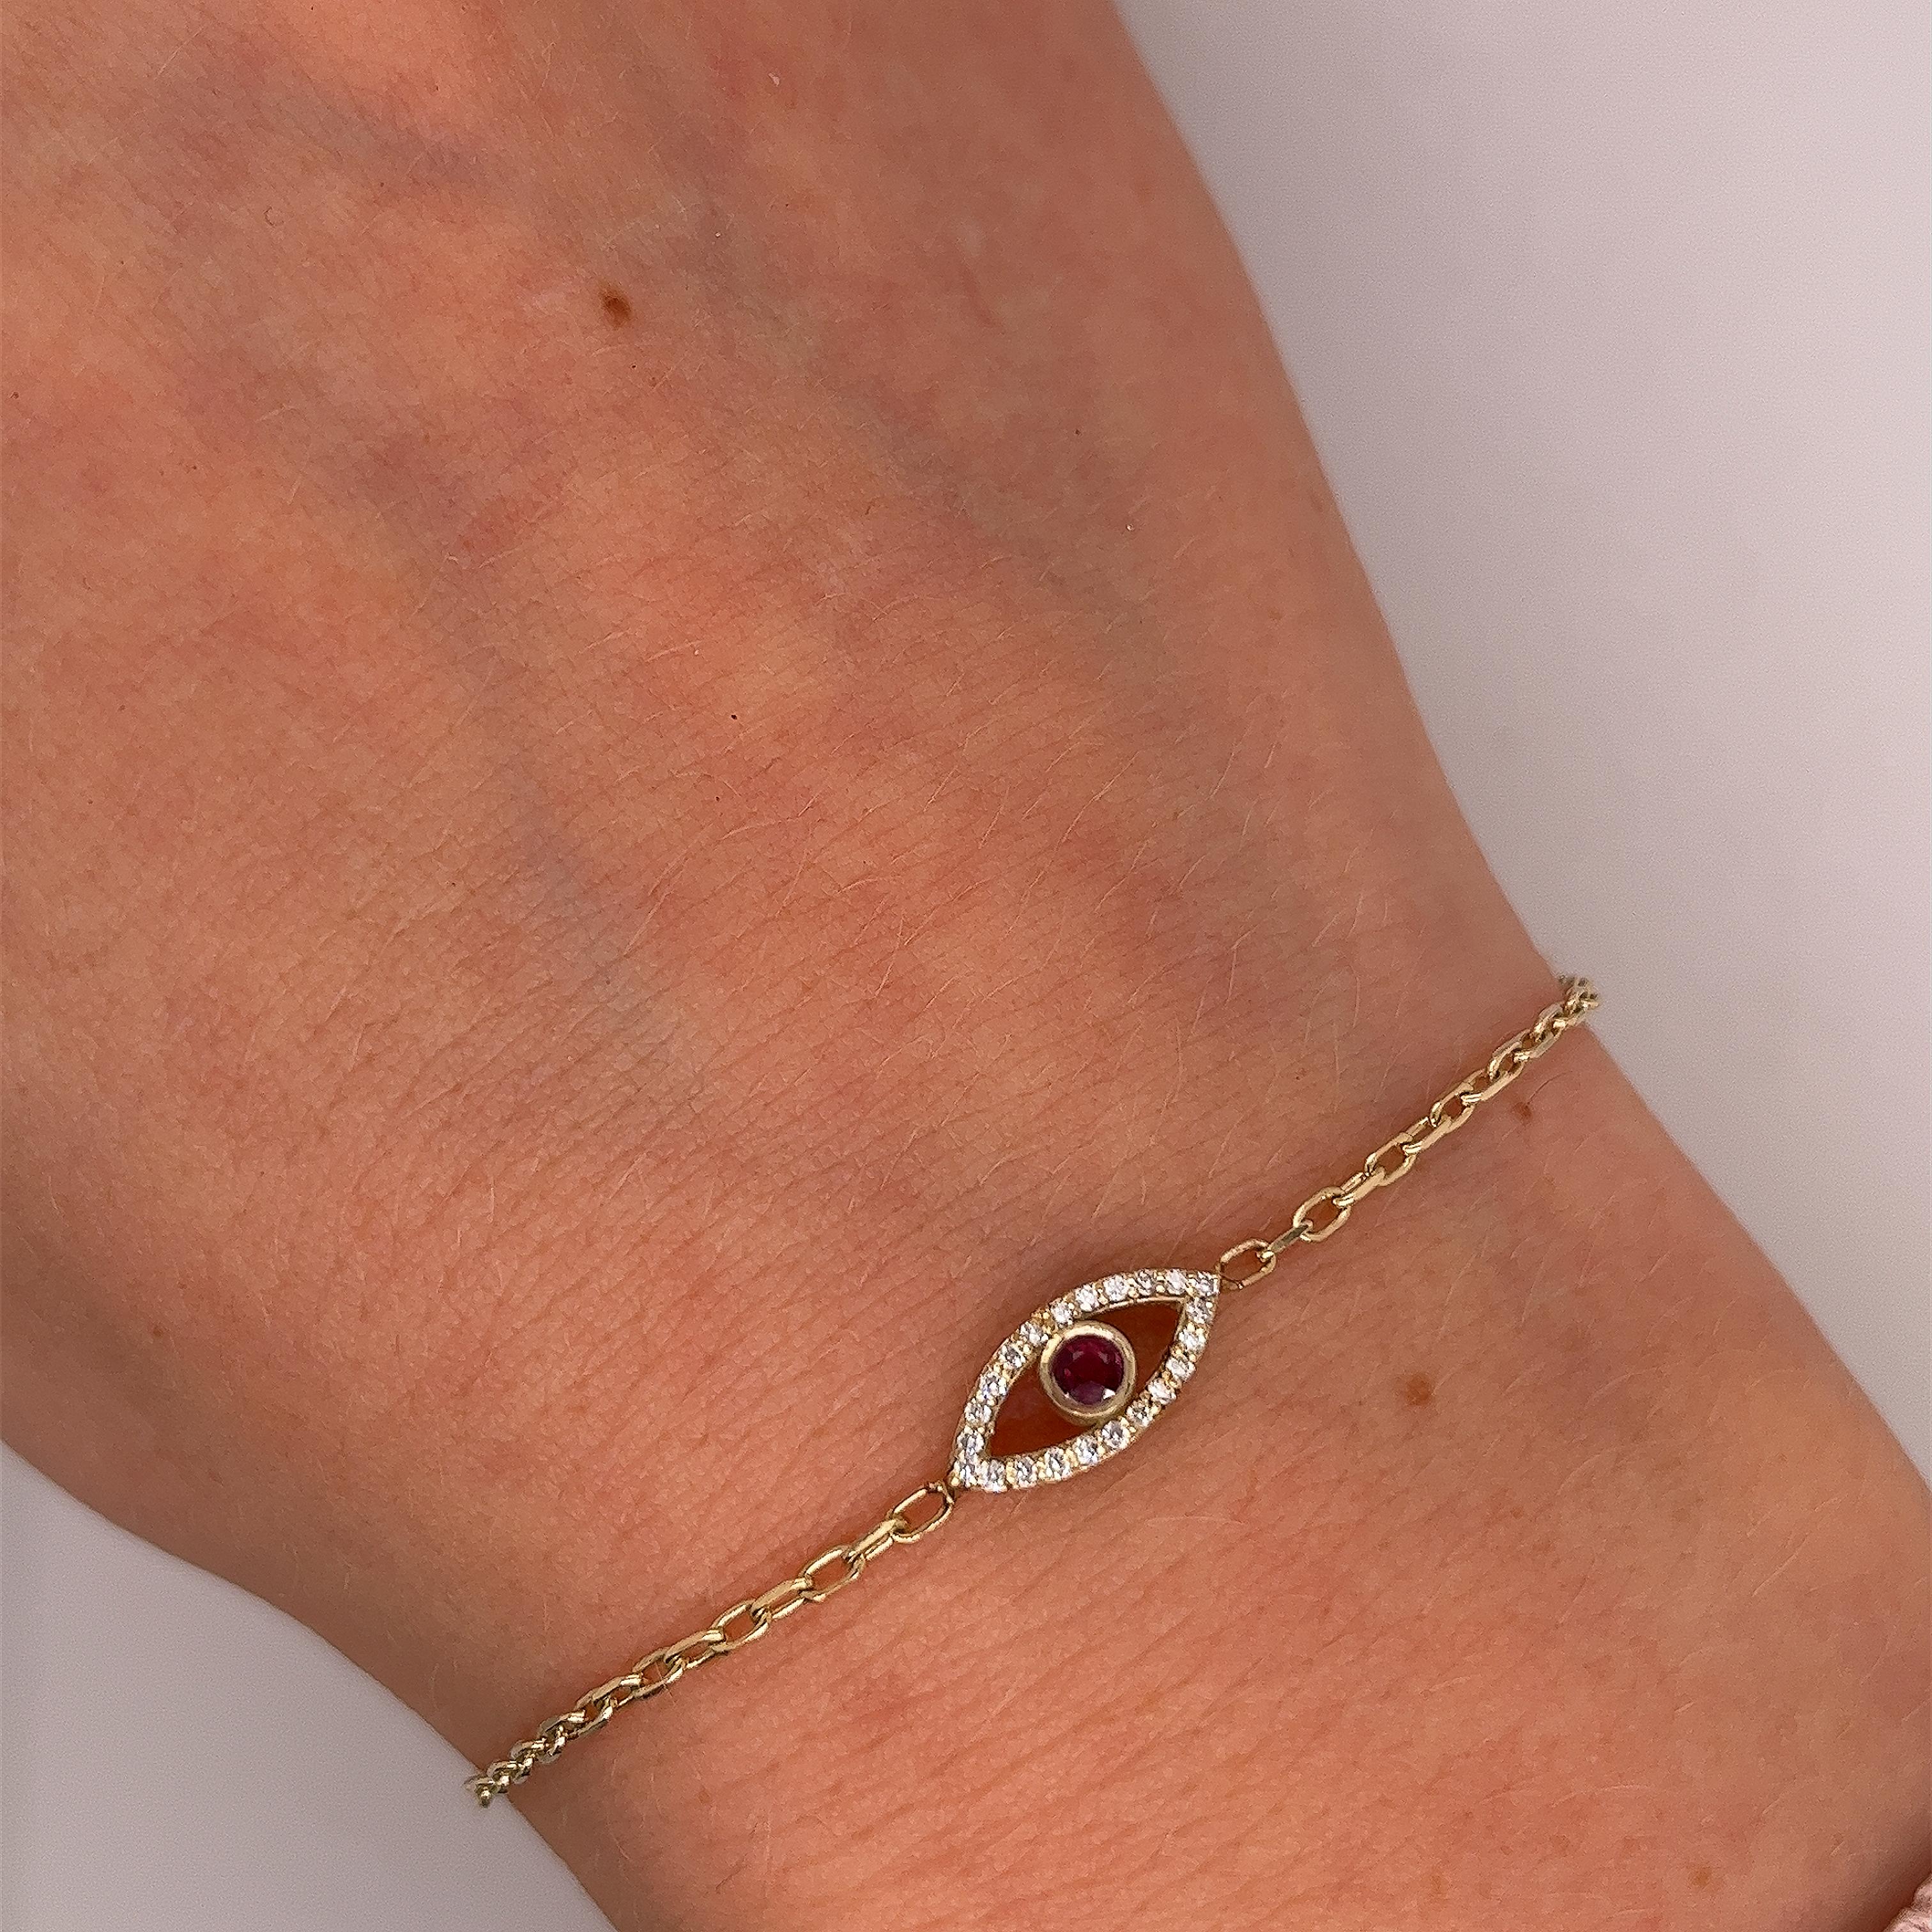 Made by Jewellery Cave- our exquisite 0.08ct diamond 
set and round ruby evil eye bracelet—
an enchanting fusion of style and symbolism. 
Crafted in 9ct yellow gold, the centrepiece of this mesmerizing 
bracelet is the striking Evil Eye charm,